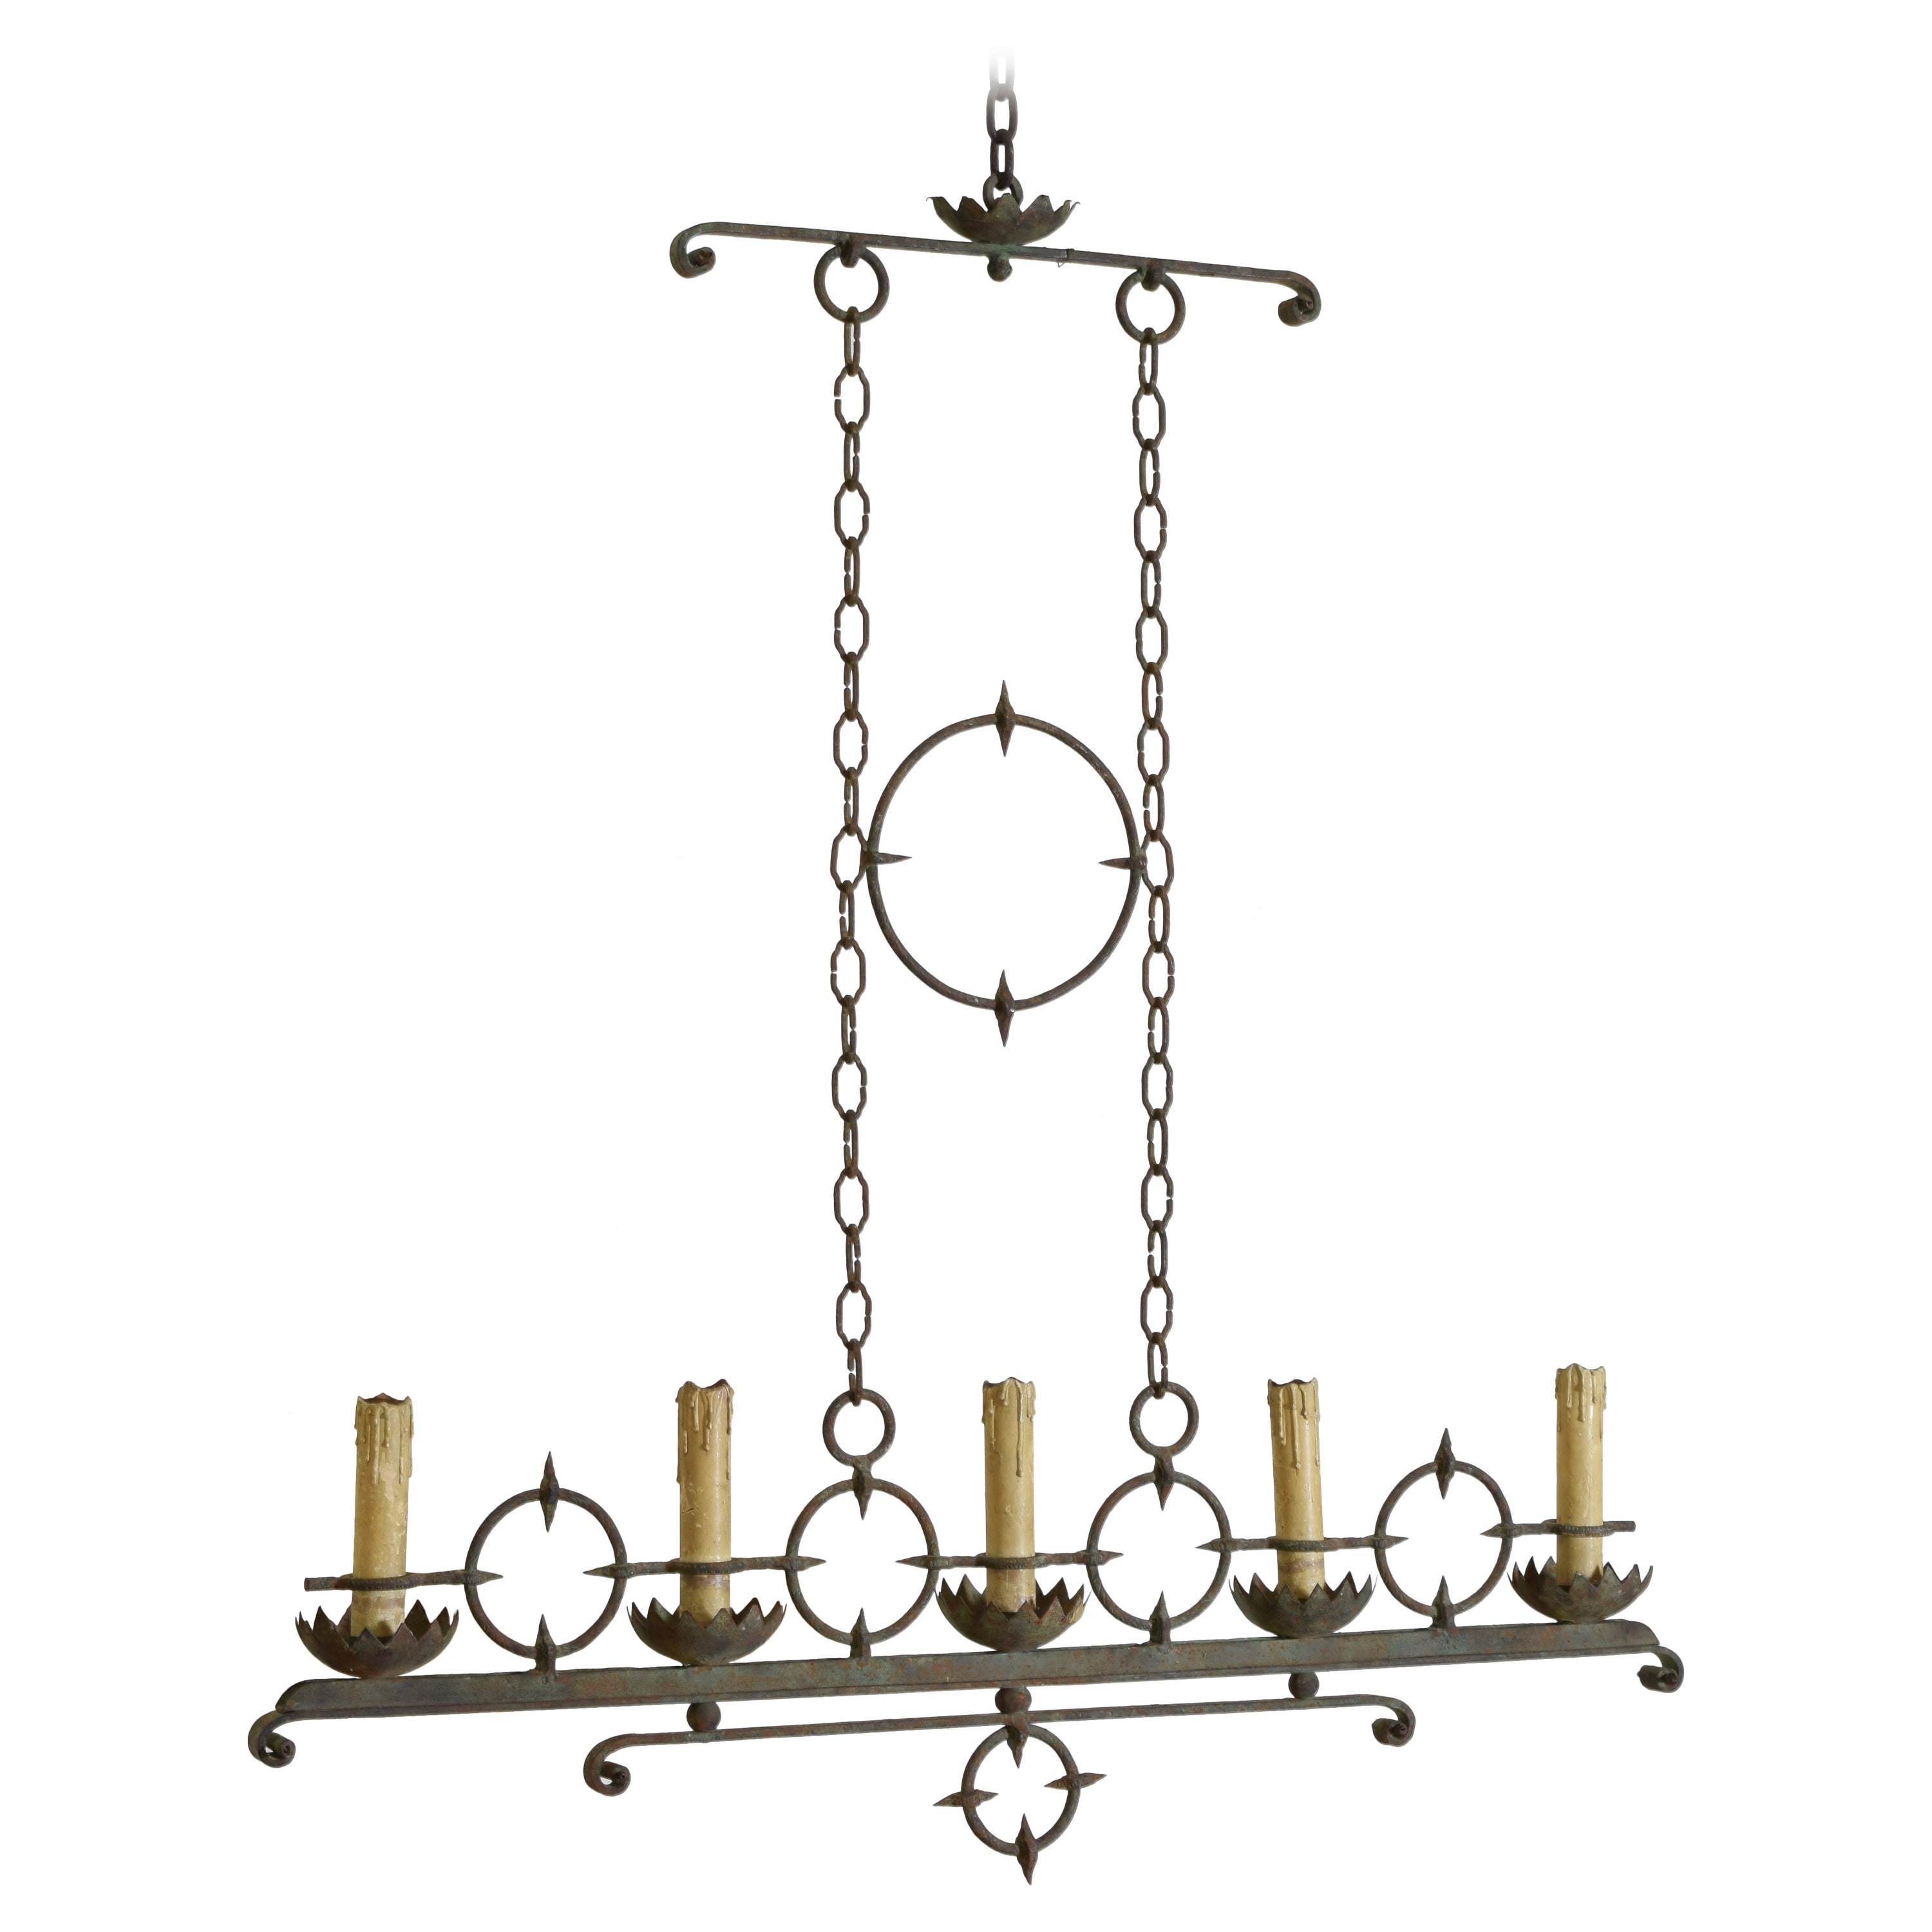 French Arts & Crafts Wrought Iron & Painted Iron 5-Light Chandelier, Early 20thc For Sale